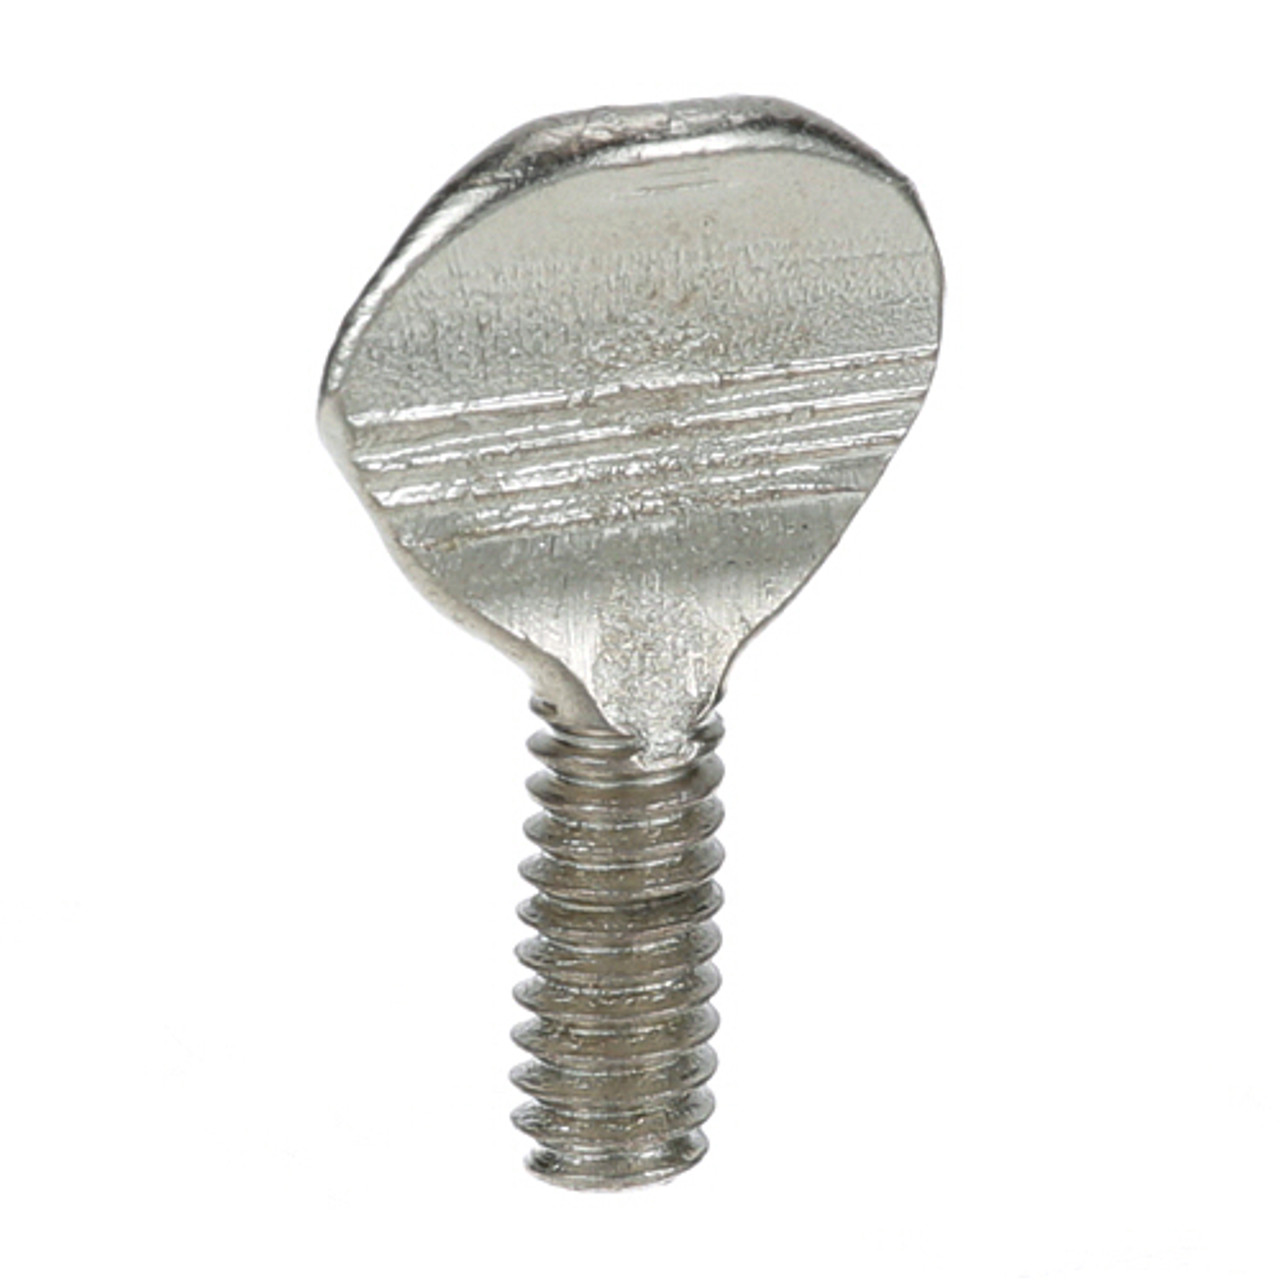 Thumbscrew 1/4-20 - Replacement Part For Attias 124